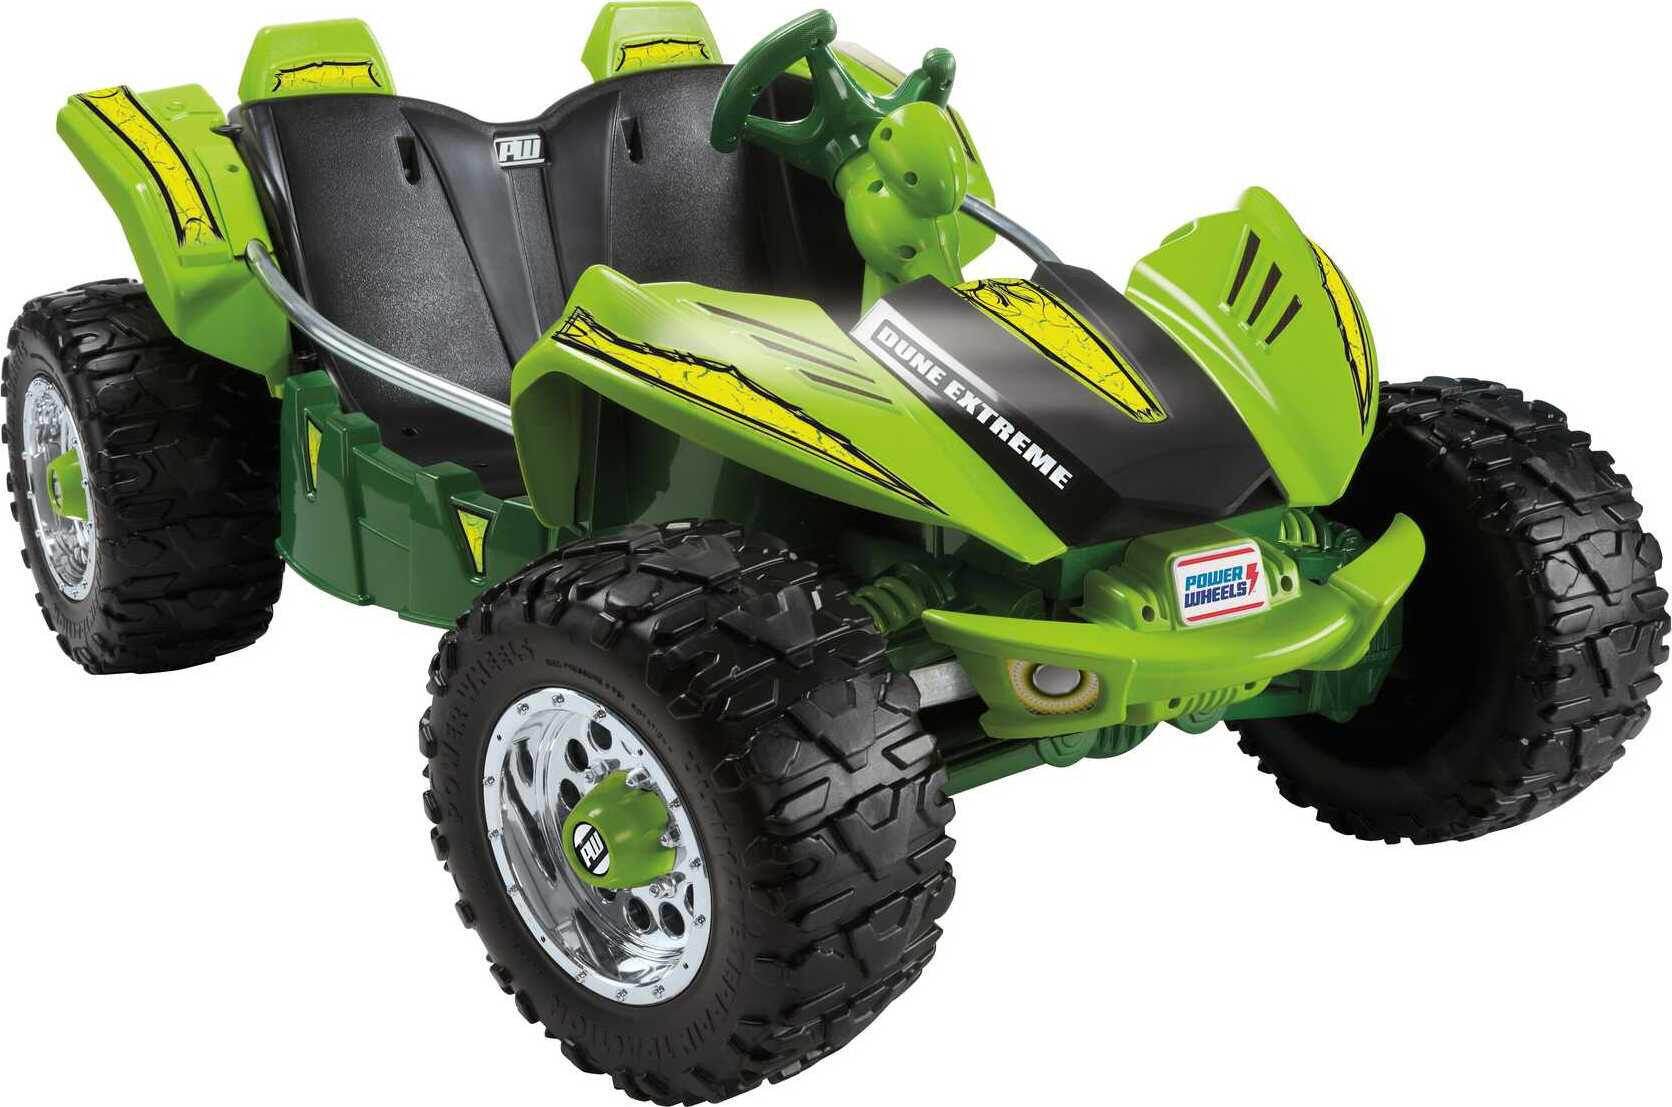 Power Wheels Dune Racer Extreme Battery-Powered Ride-on, 12 V, Max Speed: 5 mph - image 1 of 7